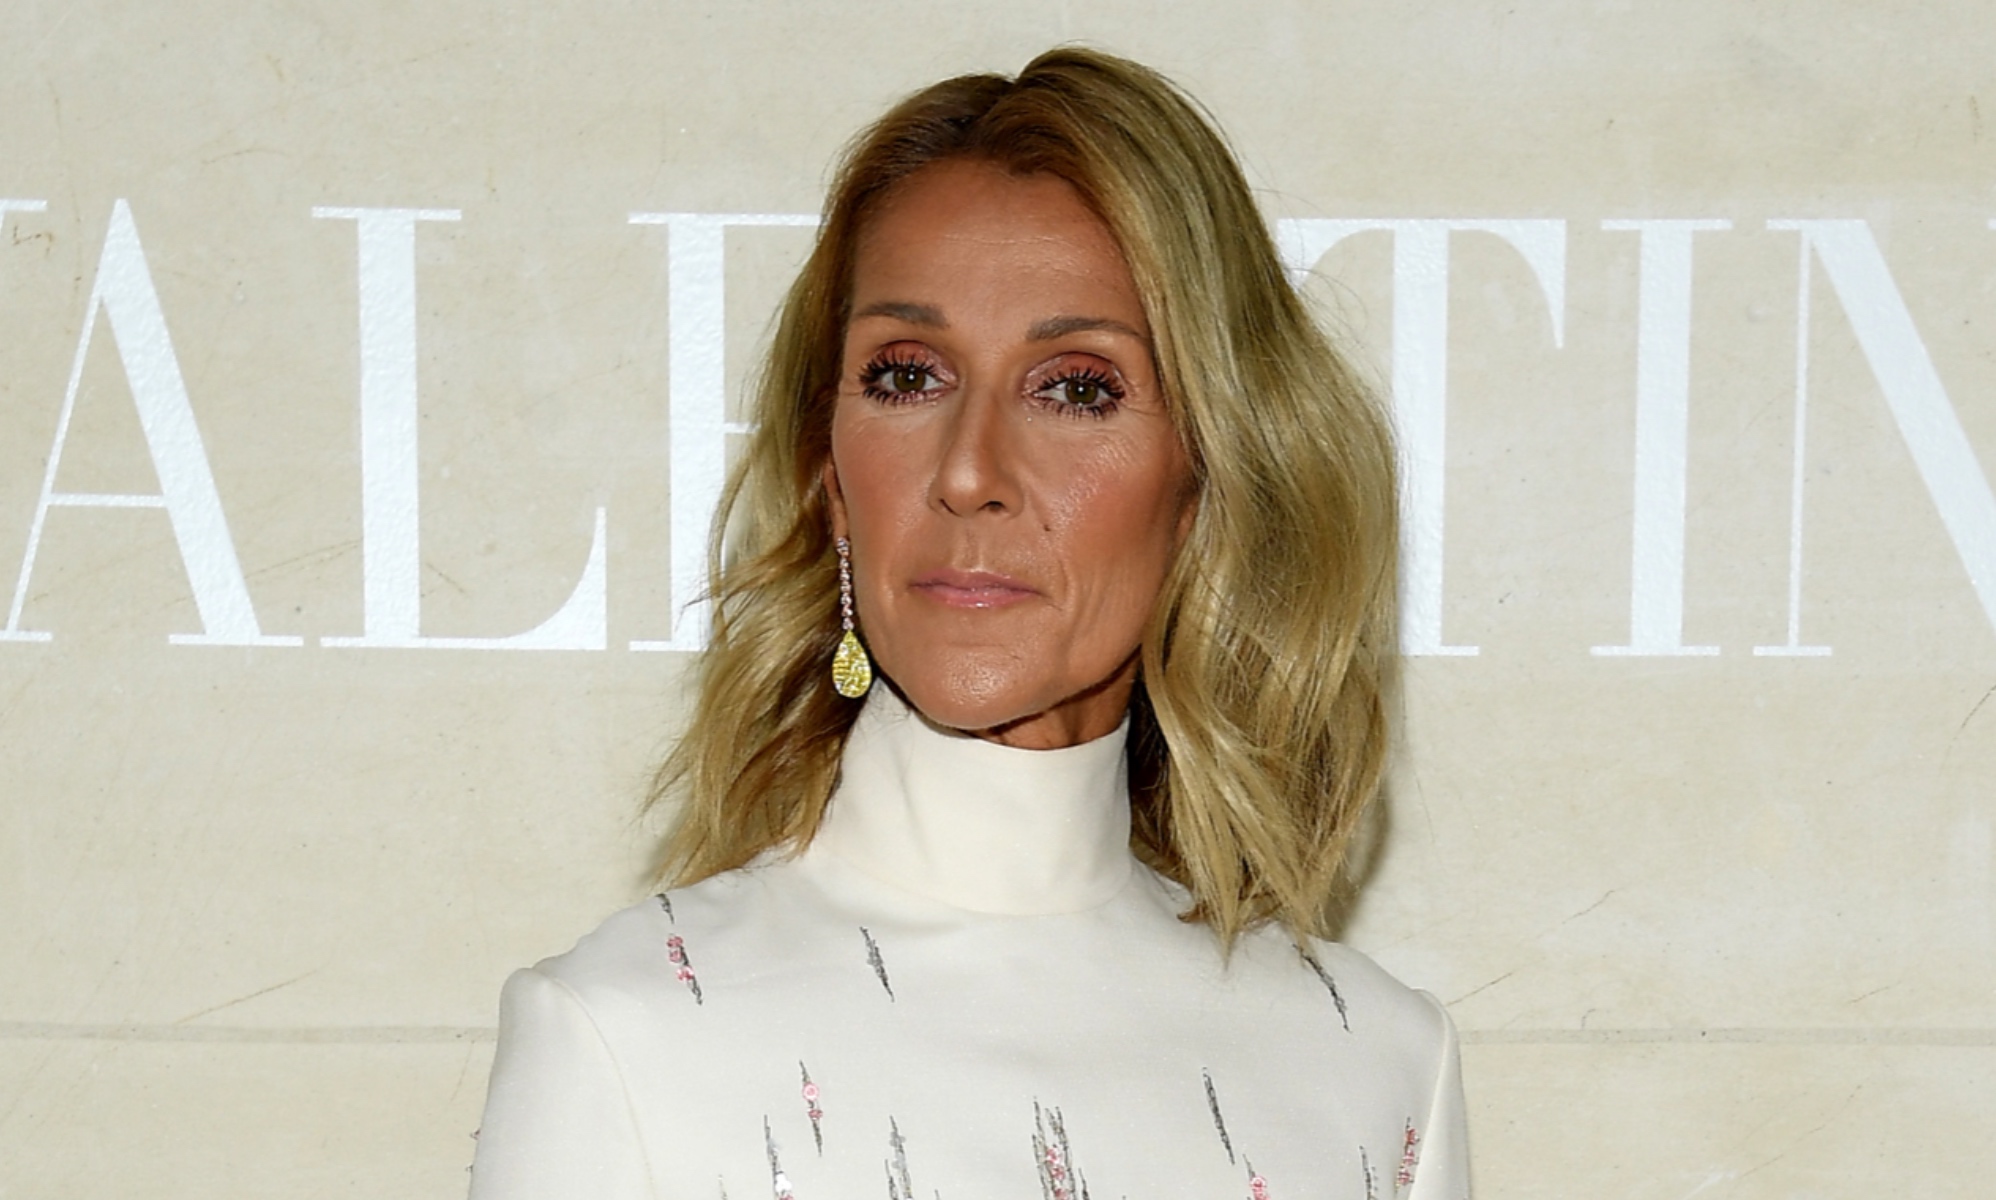 Celine Dion has no ‘control over her muscles’, her sister reveals